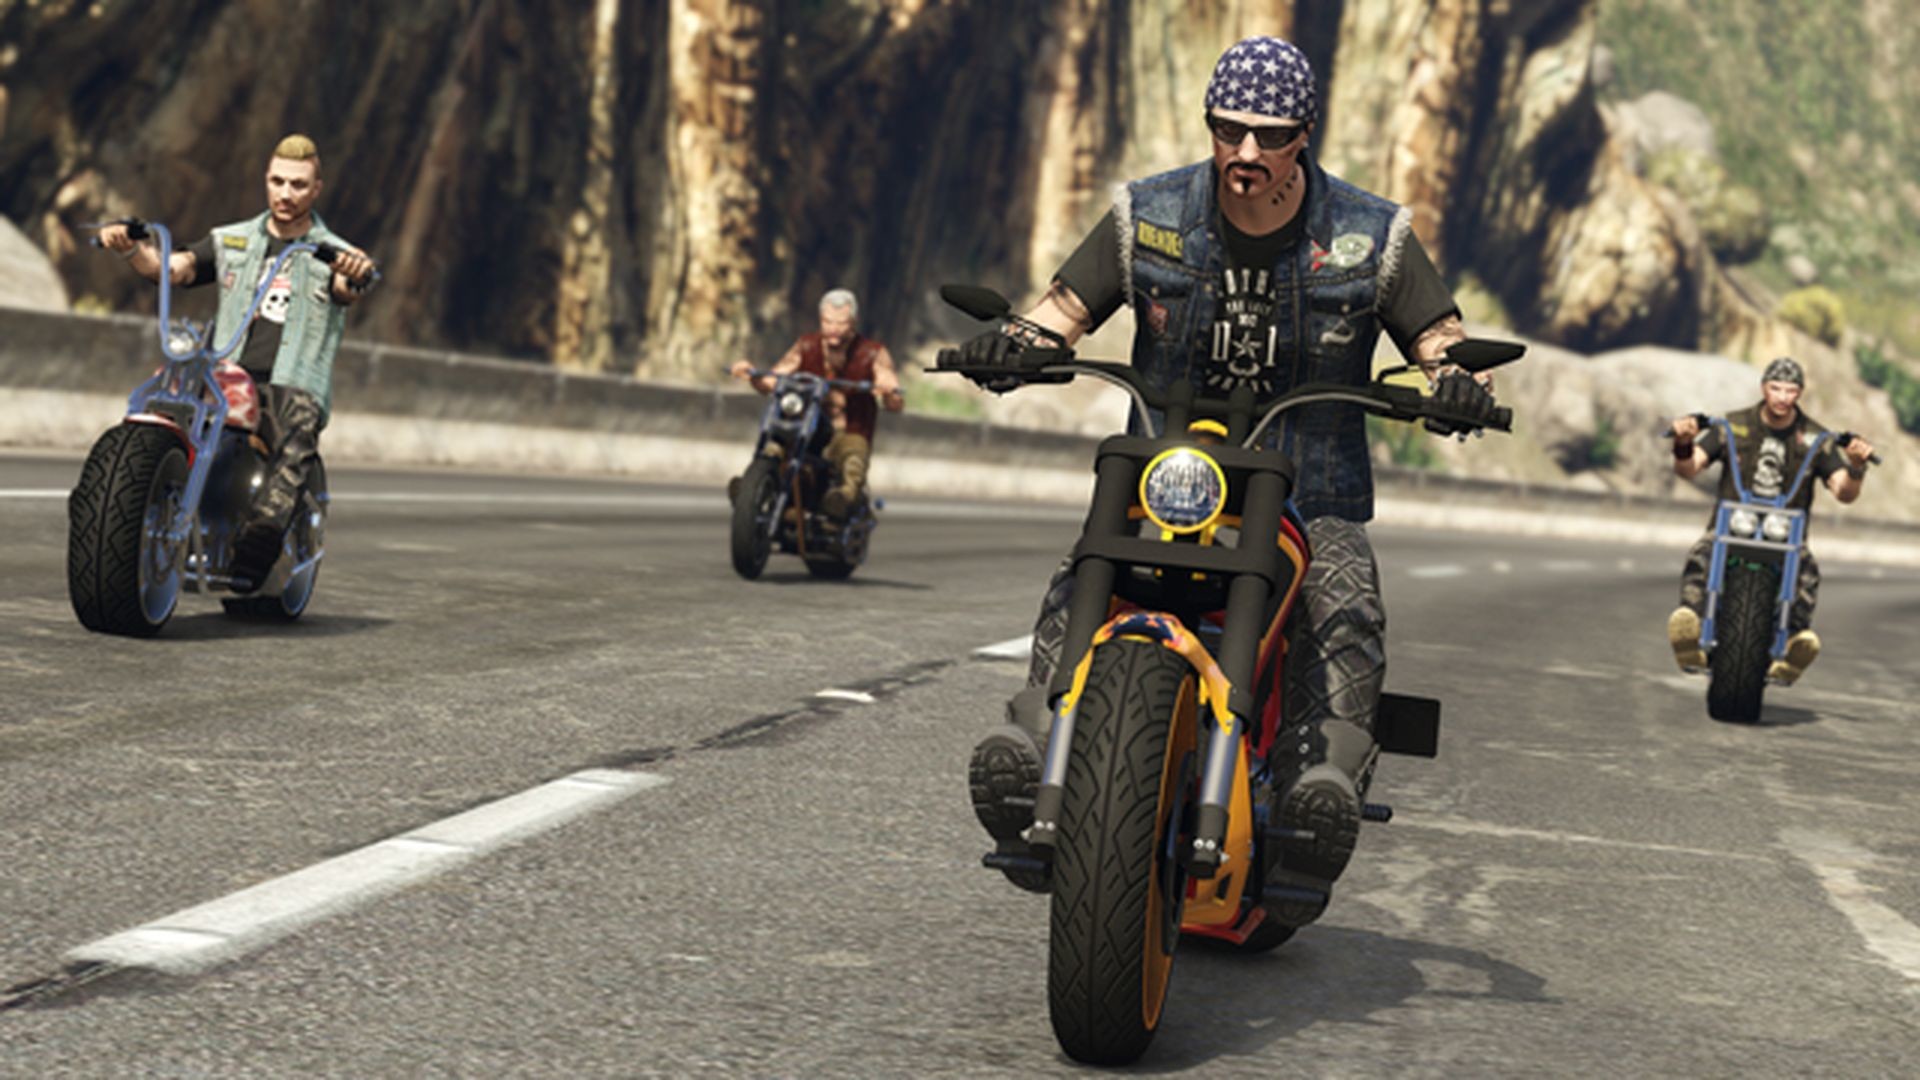 Grand Theft Auto: Bikers Update to Launch October 4th